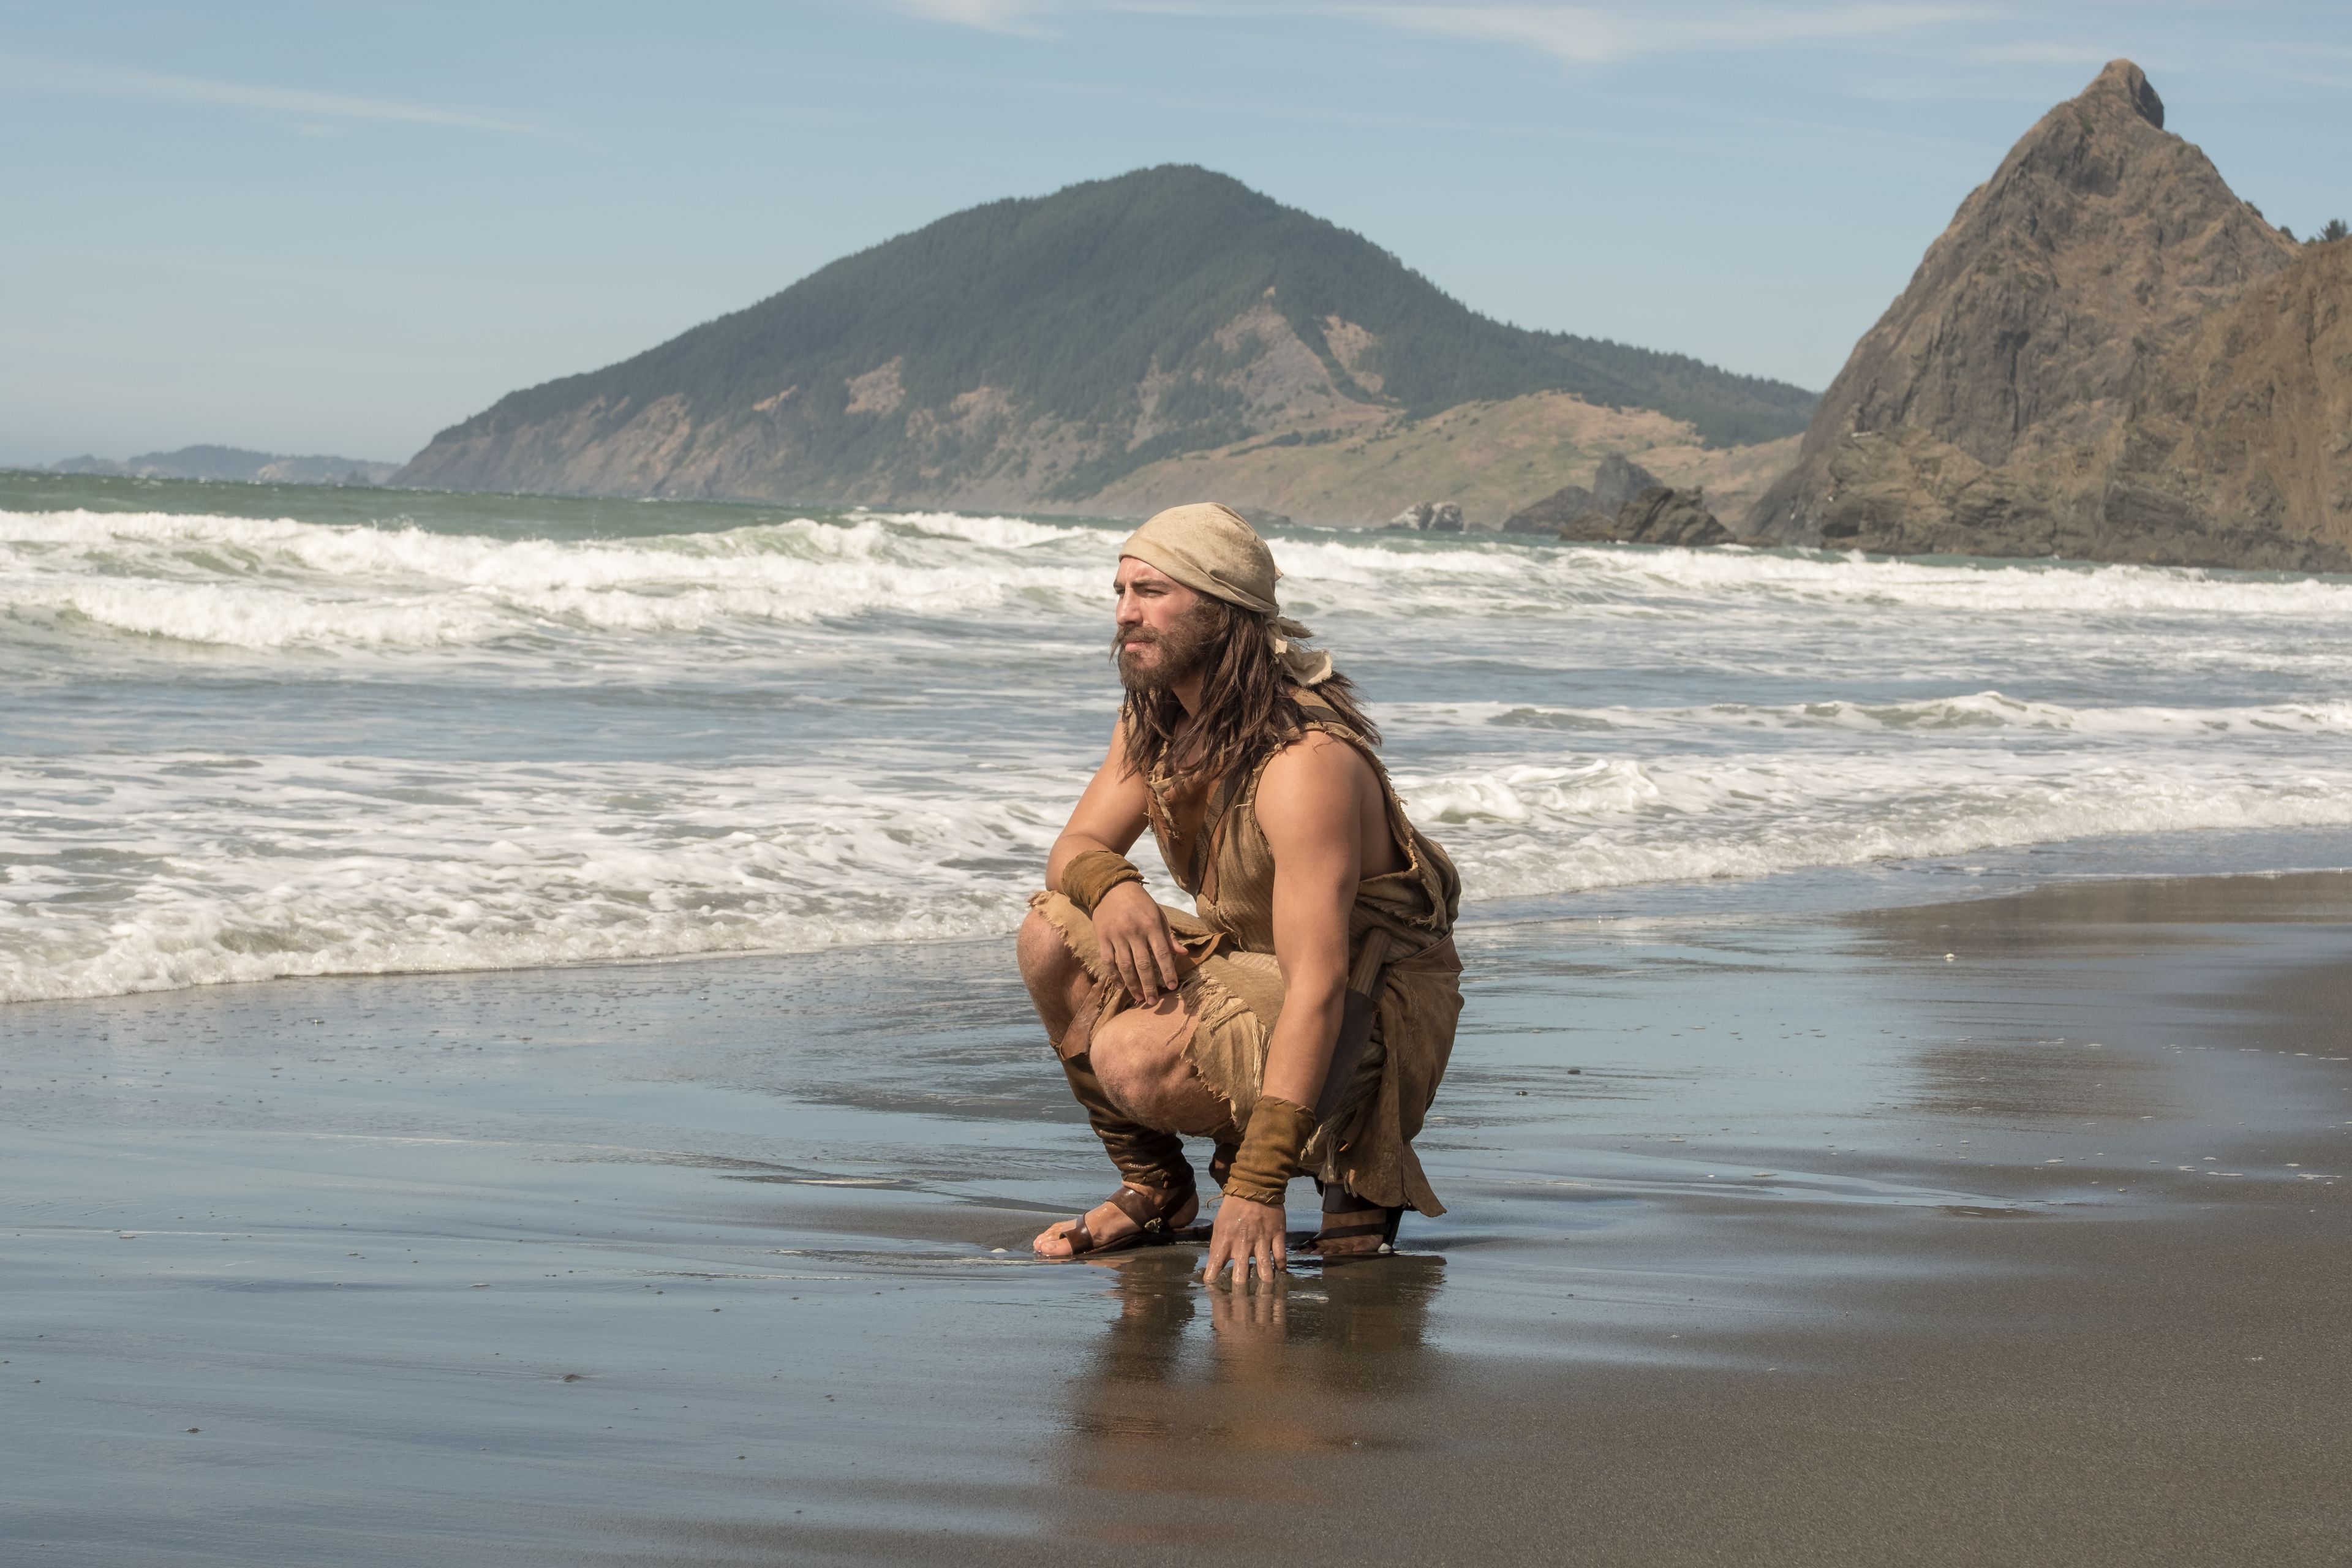 Nephi kneels on the seashore in the land of Bountiful.